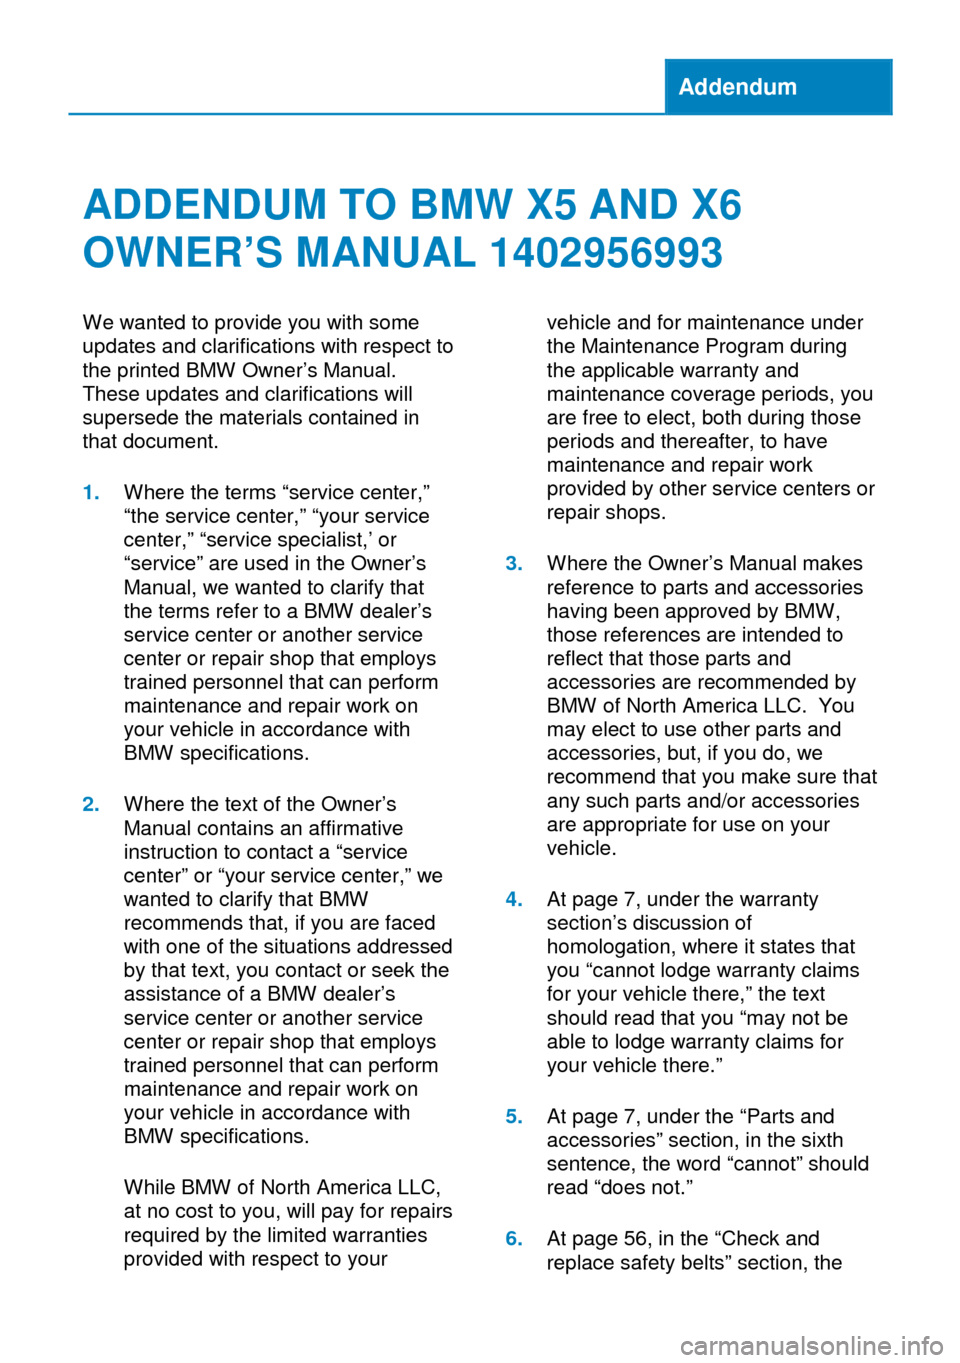 BMW X5M 2014 F85 Owners Manual Addendum
ADDENDUM TO BMW X5 AND X6
OWNER’S MANUAL 1402956993
We wanted to provide you with some
updates and clarifications with respect to
the printed BMW Owner’s Manual.
These updates and clarifi